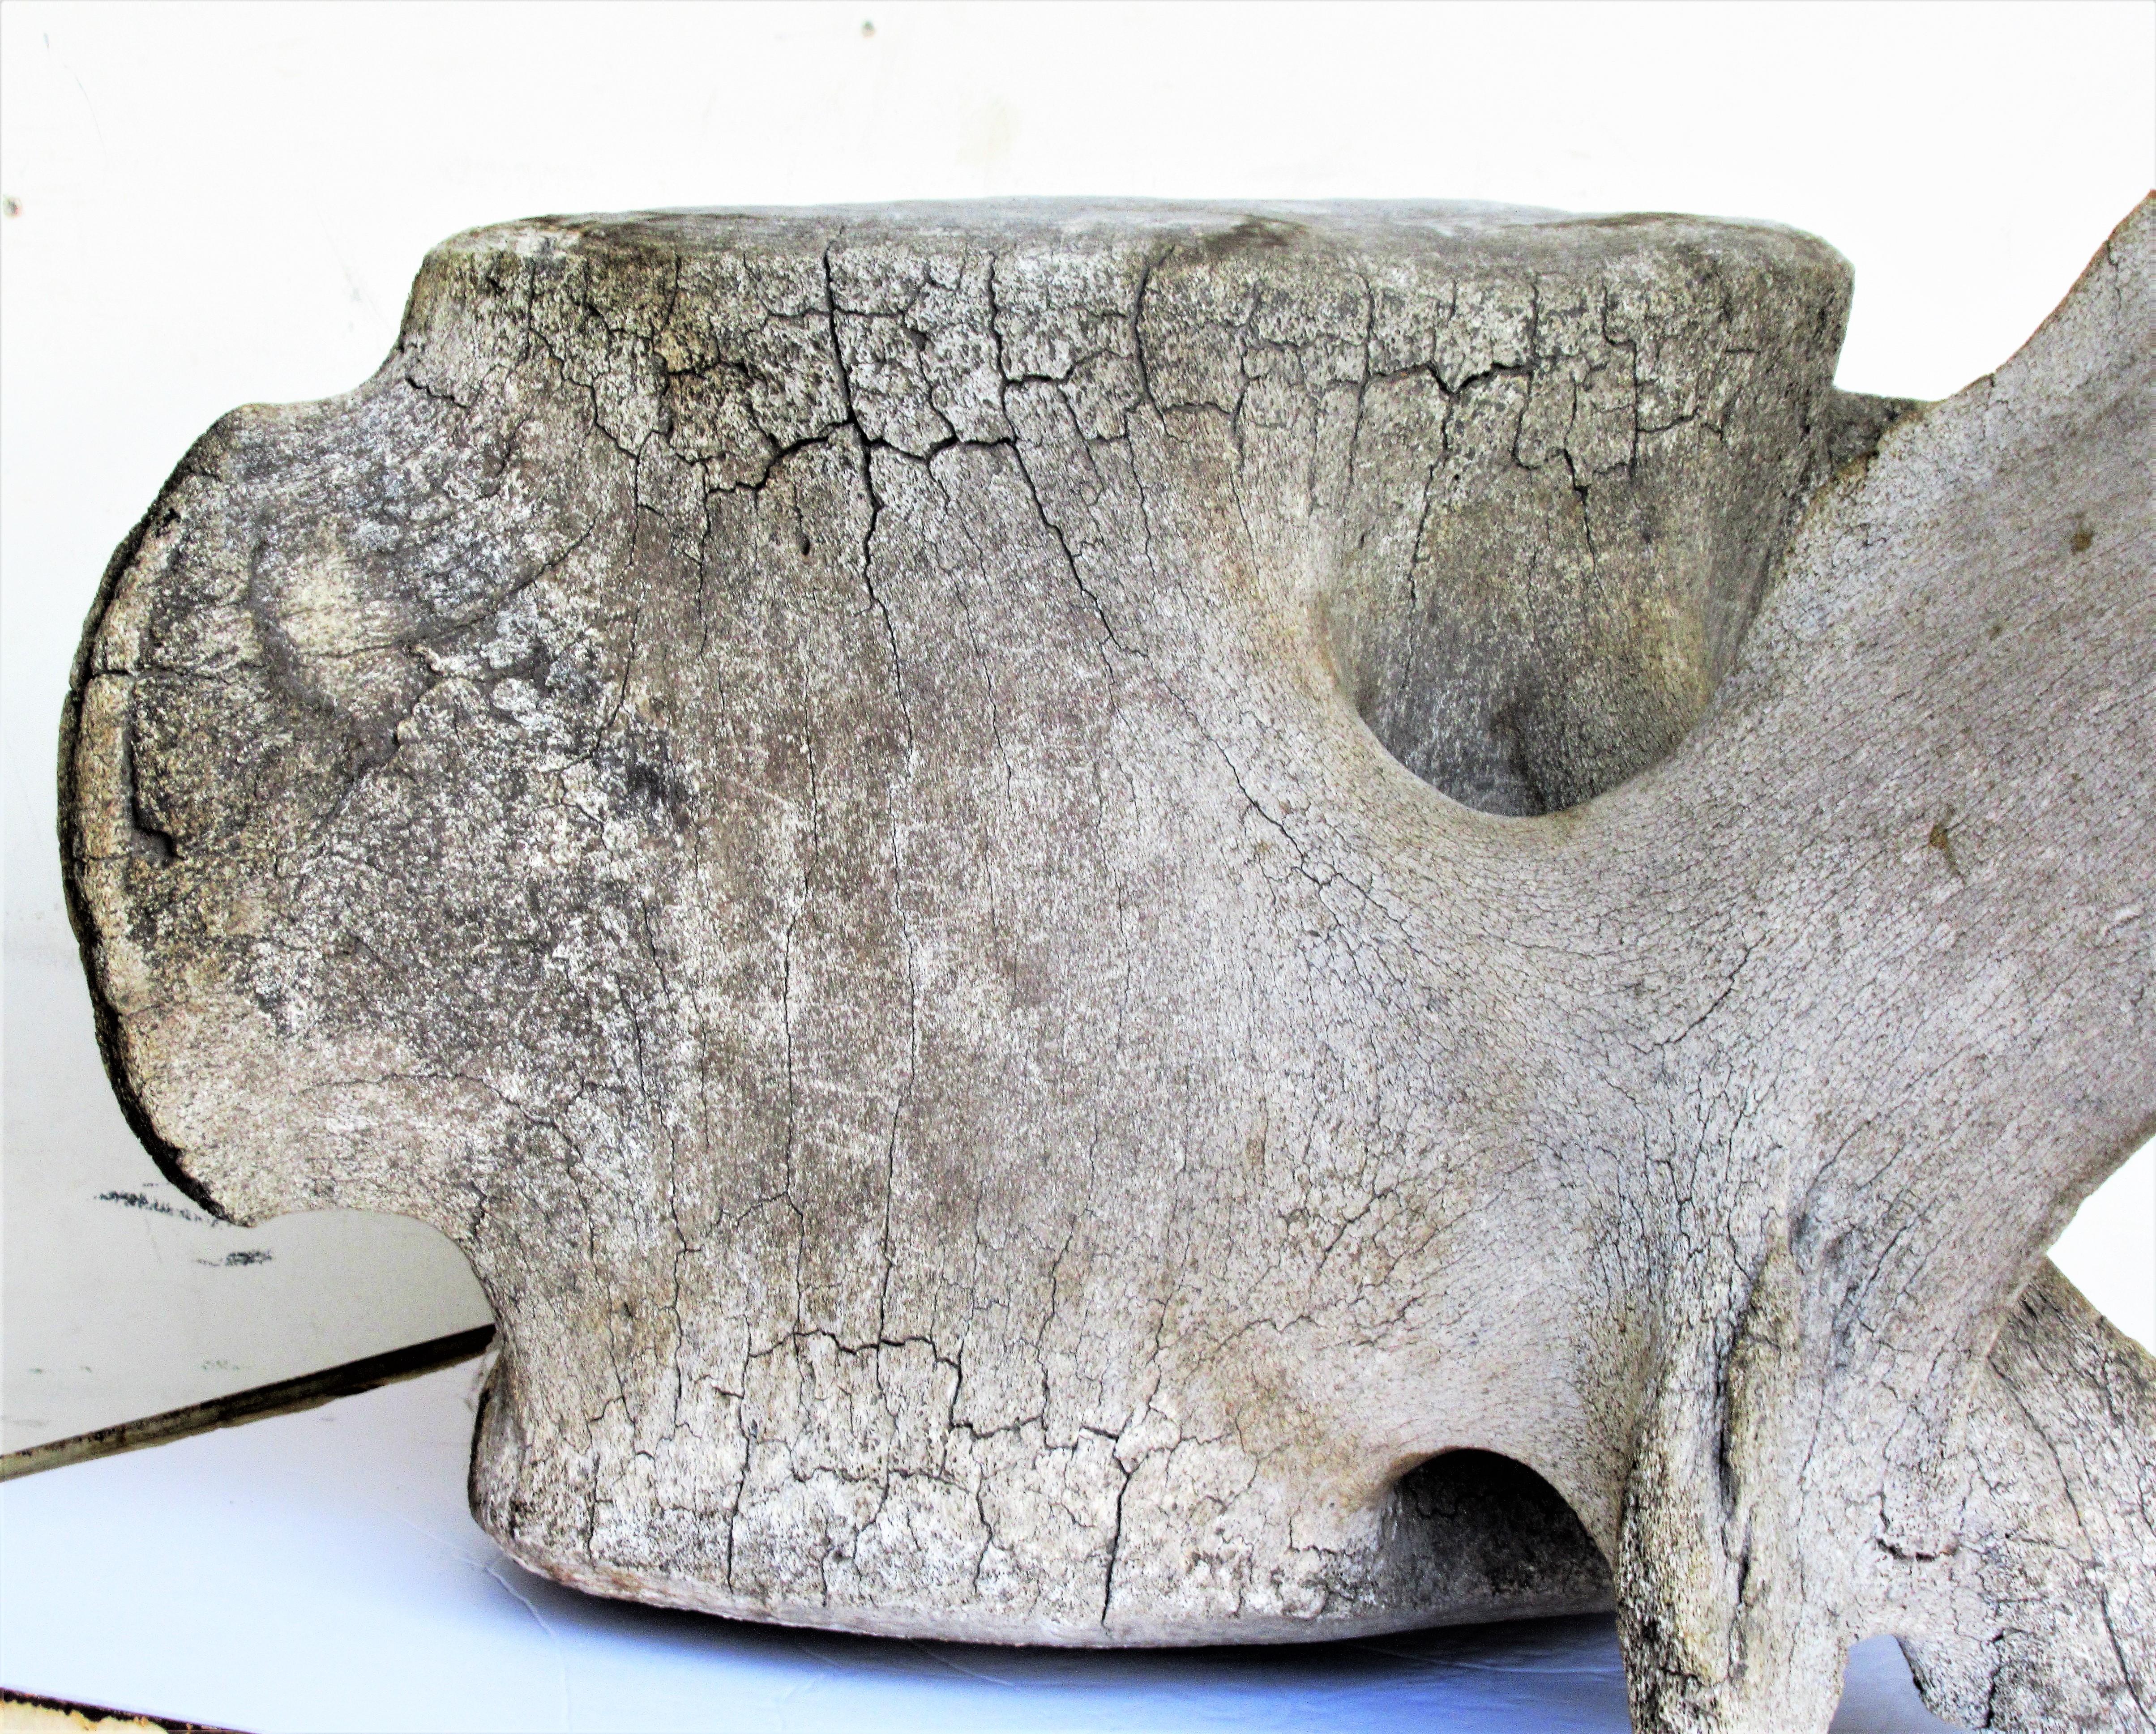 Very big antique whale vertebrae bone in beautiful naturally aged old surface. Measures 30 inches wide x 24 inches deep x 17 1/2 inches high. Spectacular old natural history item. Look at all and read condition report in comment section.